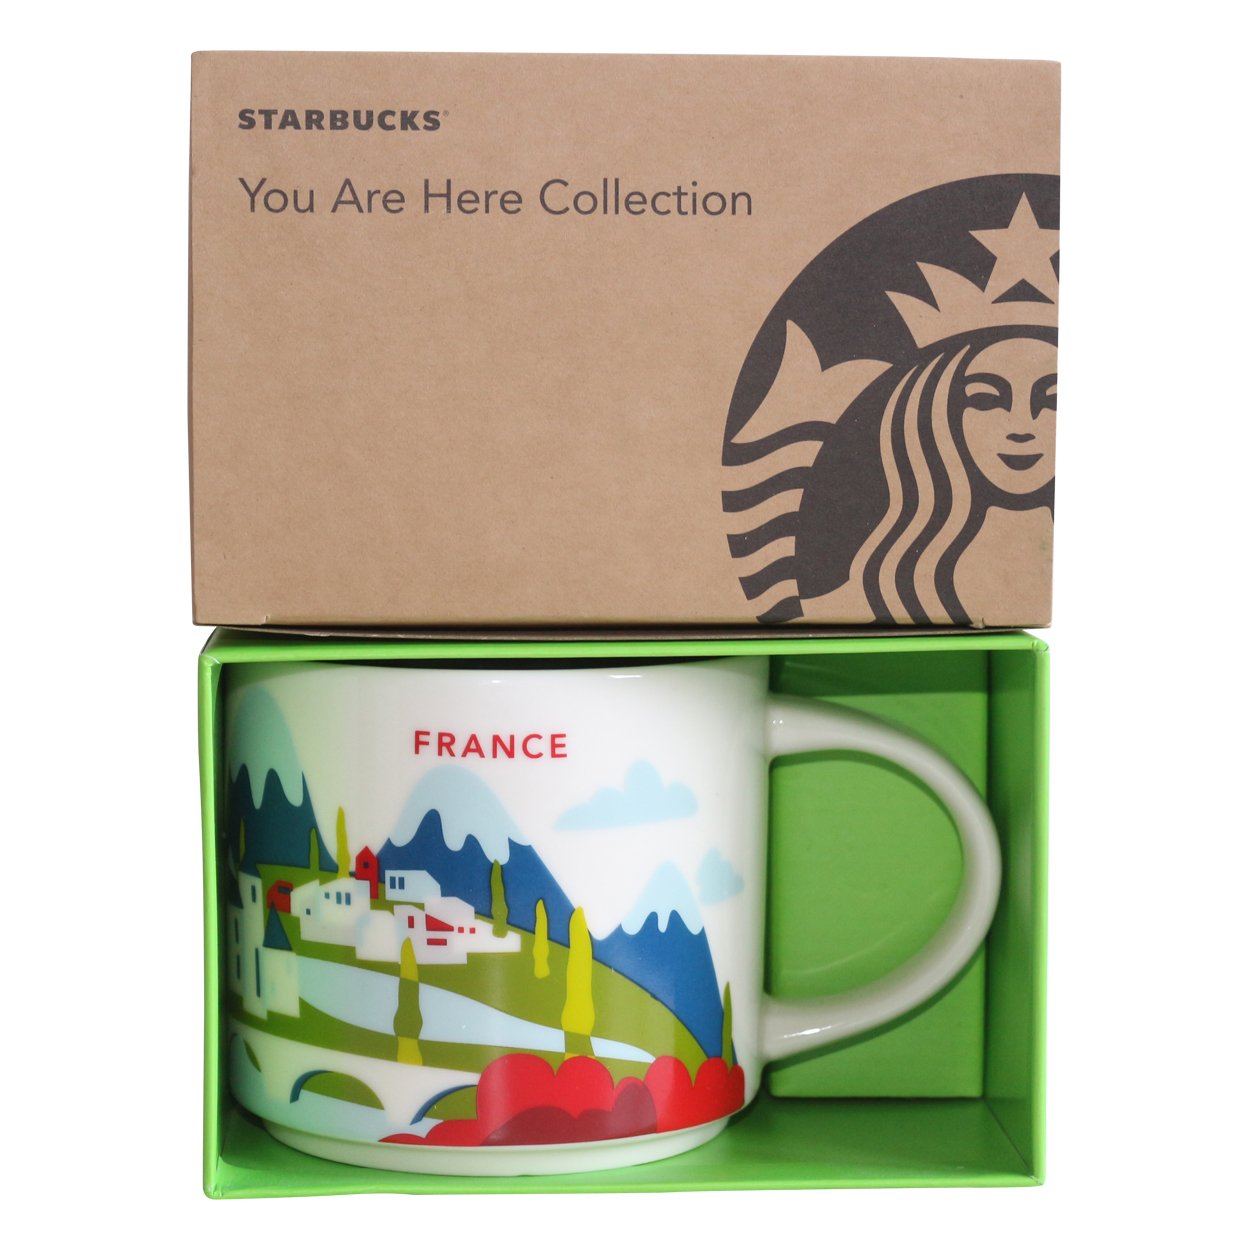 Starbucks You Are Here Collection France Ceramic Coffee Mug New with Box